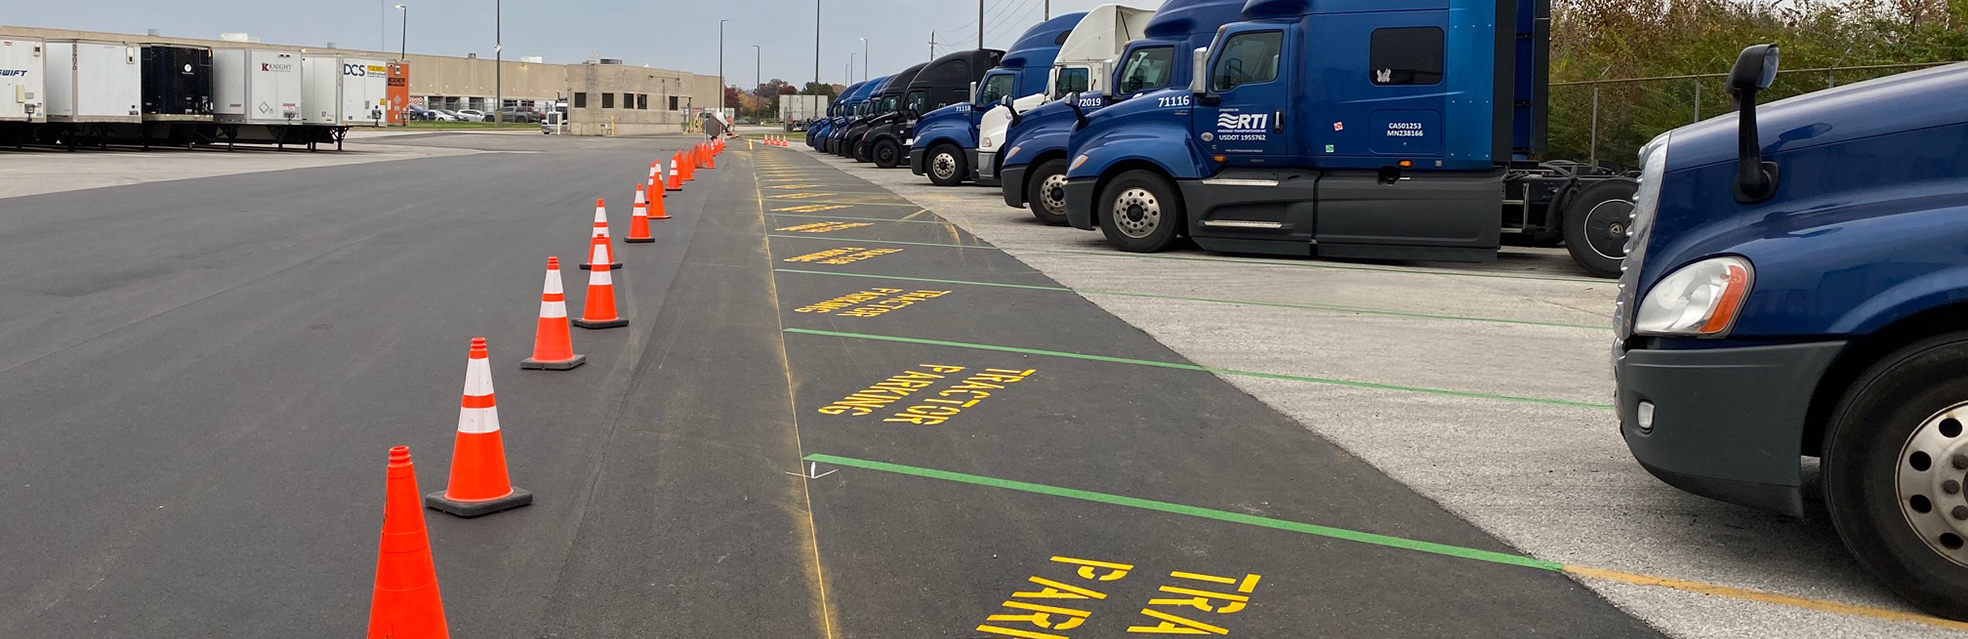 parking lot in distribution center with new line markings and asphalt